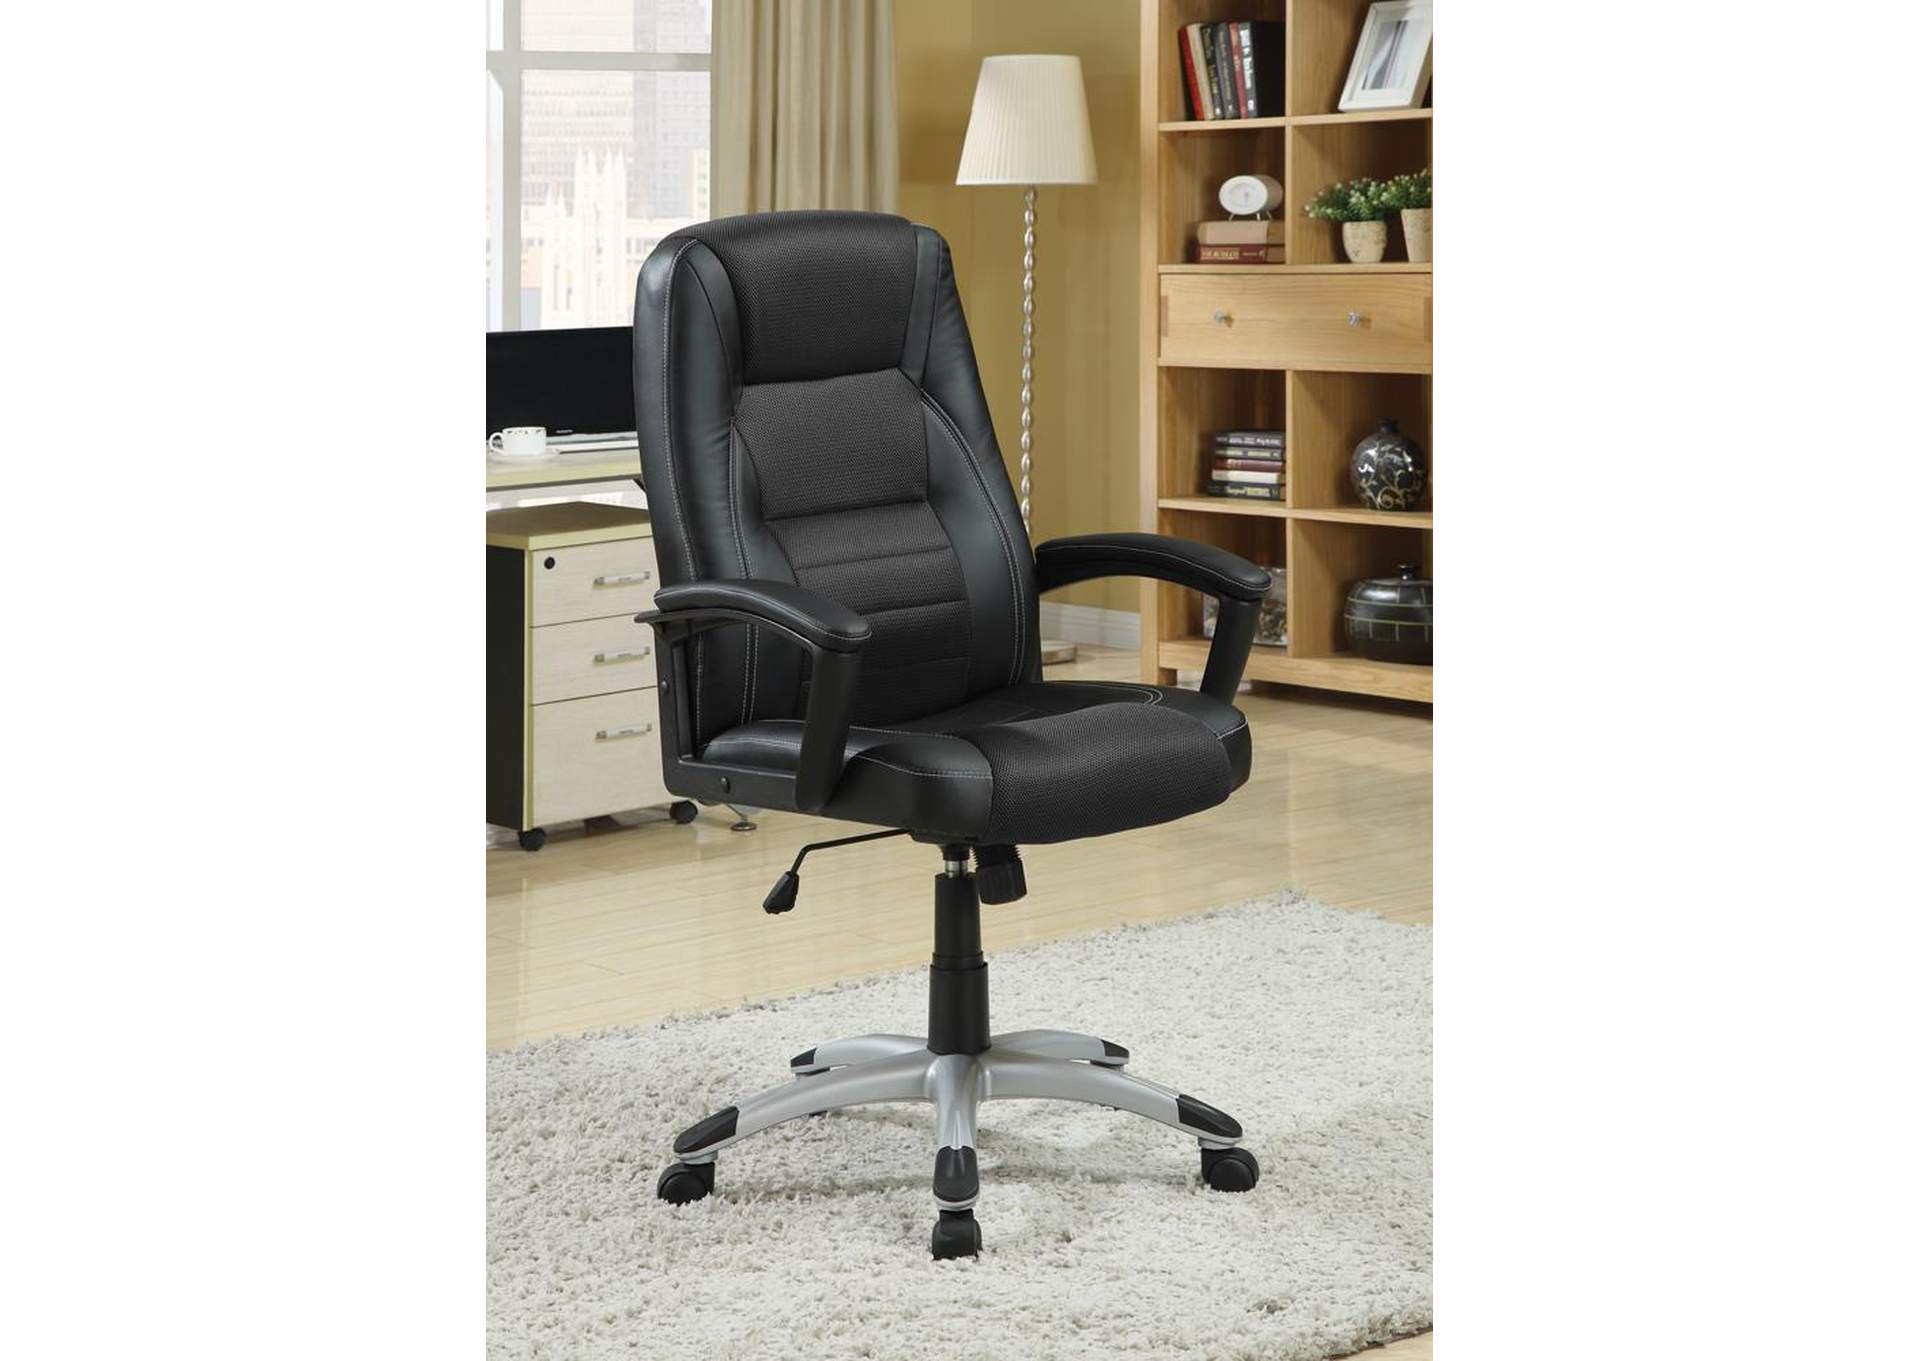 Black Office Chair,ABF Coaster Furniture